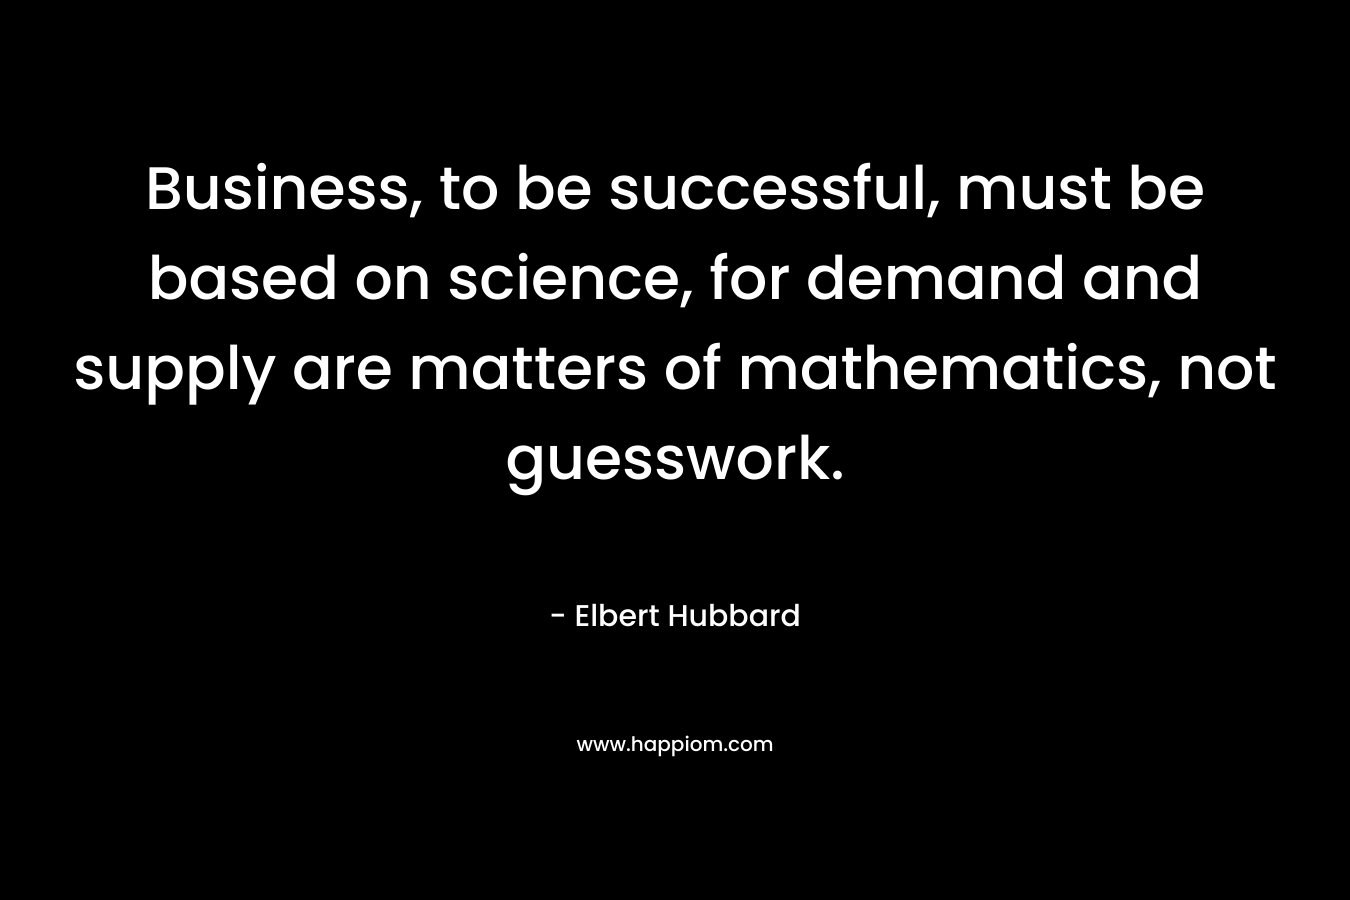 Business, to be successful, must be based on science, for demand and supply are matters of mathematics, not guesswork.